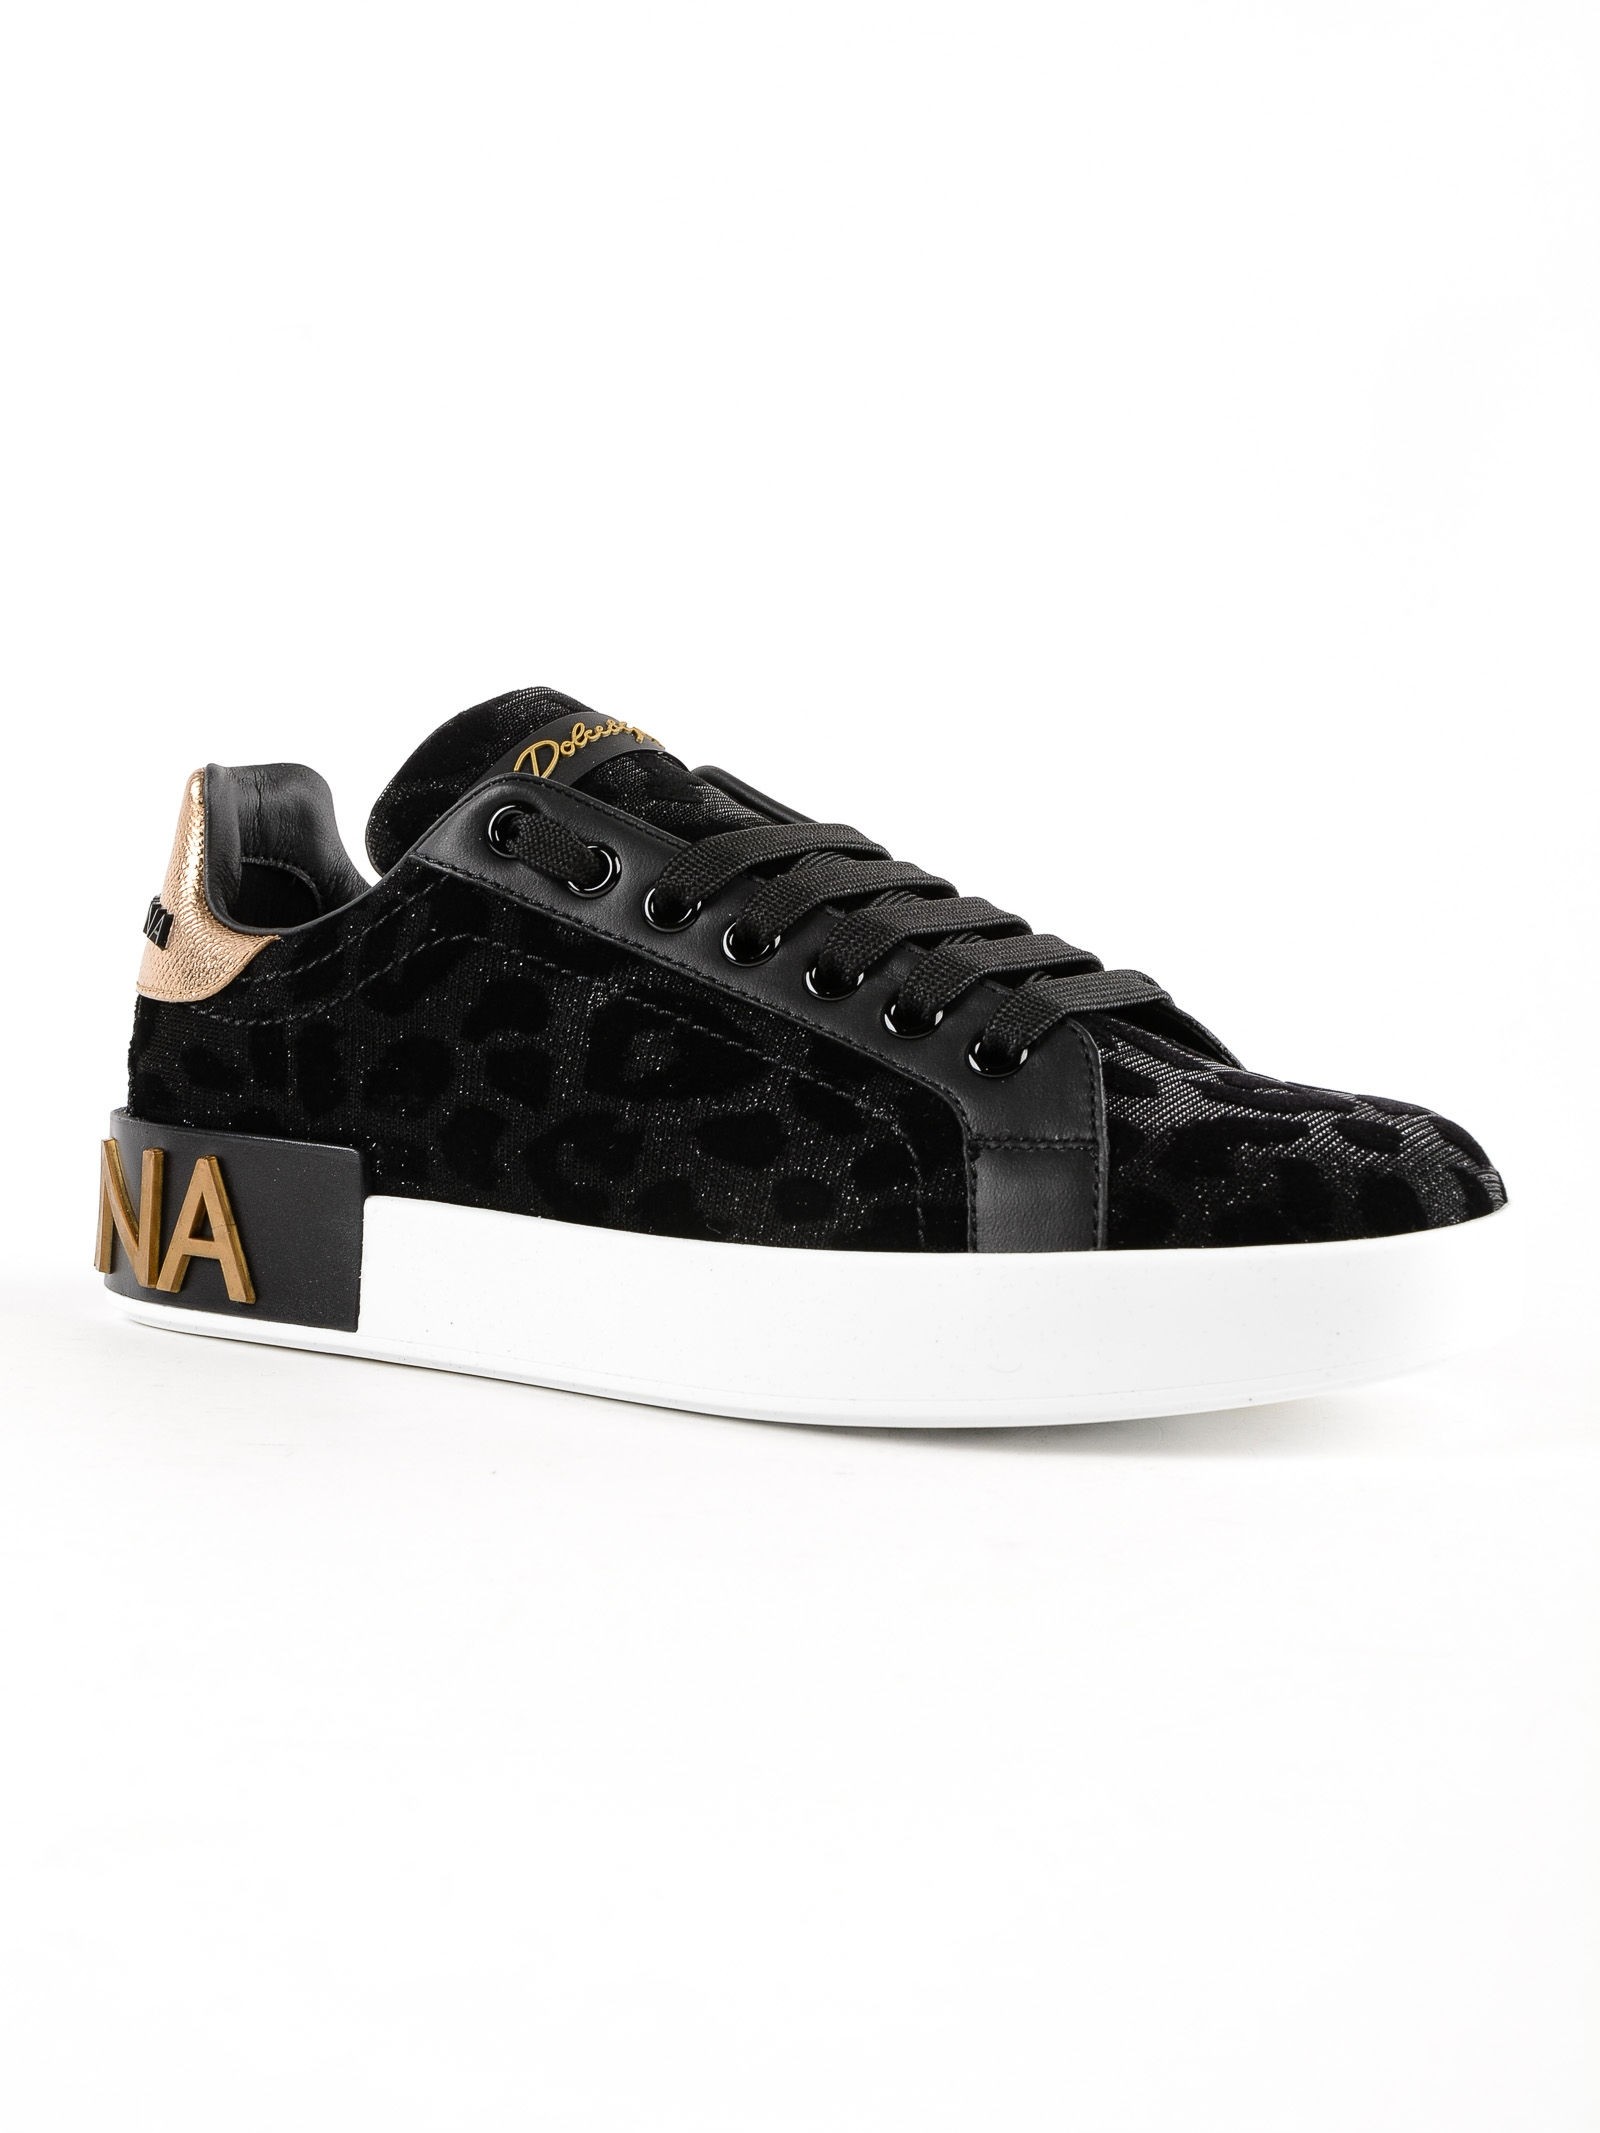 Dolce and Gabbana Dolce & Gabbana Ladies Low Top Lace-up Leather Sneaker in Black CK1570 AV262 8B956